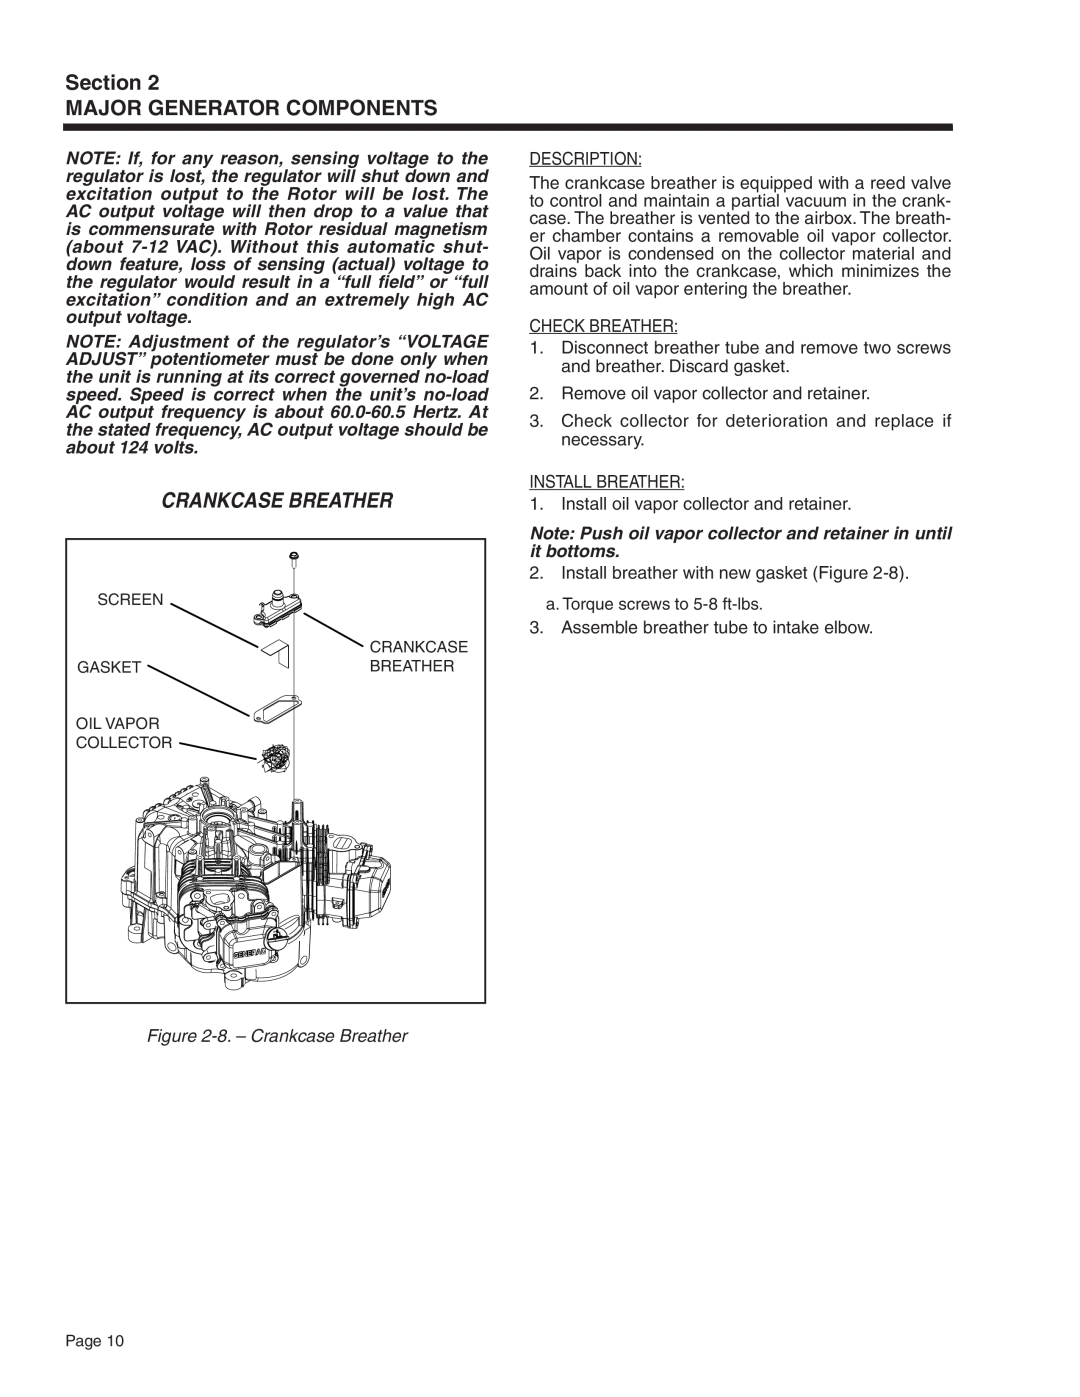 Generac Power Systems 5412 8. - Crankcase Breather, Note Push oil vapor collector and retainer in until it bottoms 